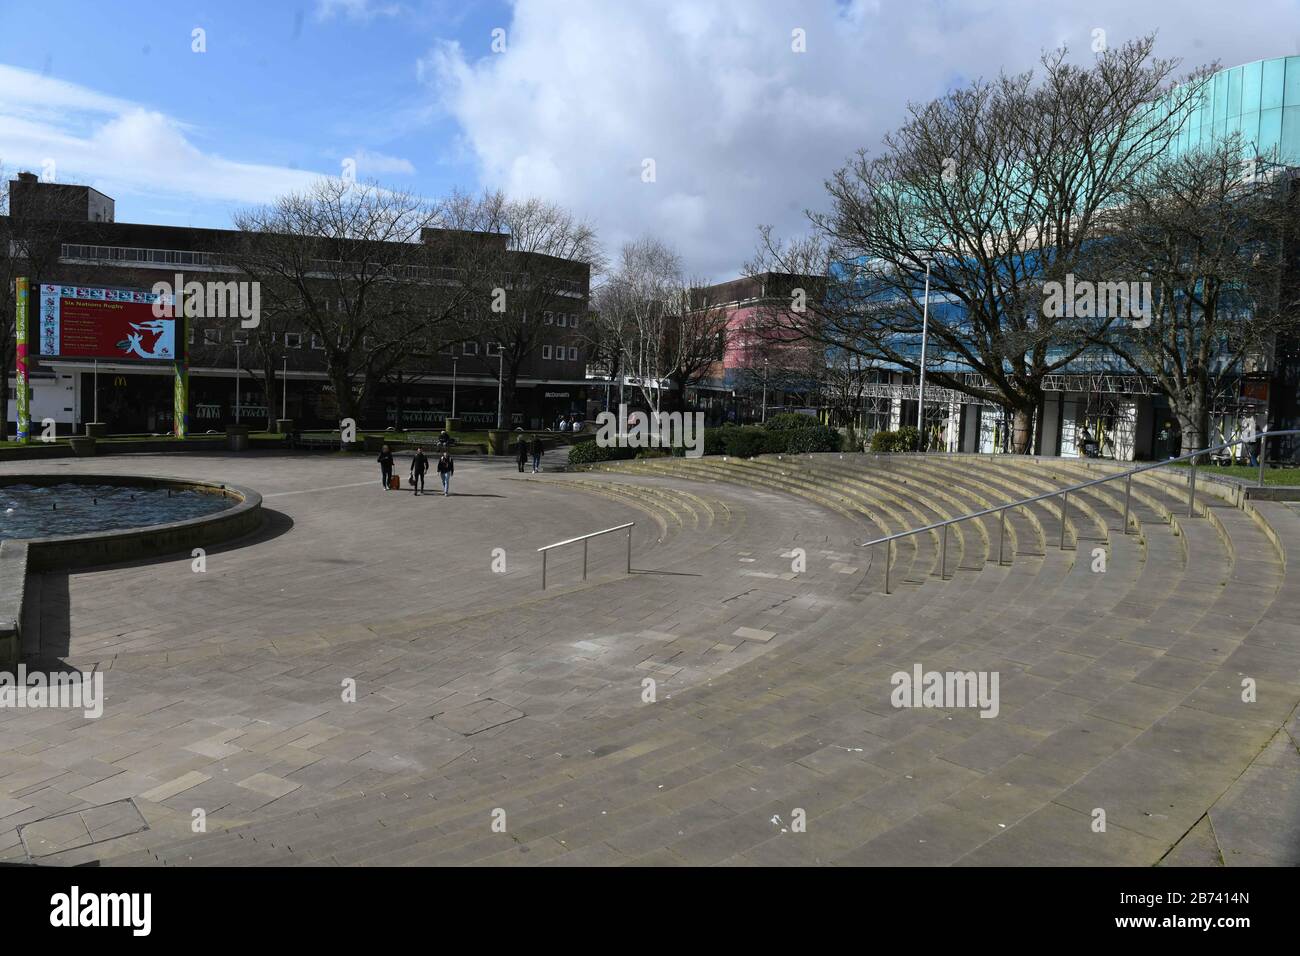 Swansea, Wales, UK. 13th March 2020. Normally busy streets in Swansea, south Wales, deserted at lunchtime on a sunny day as people stay away due to Coronavirus fears as it takes a grip of everyday life across the UK. Credit : Robert Melen/Alamy Live News. Stock Photo